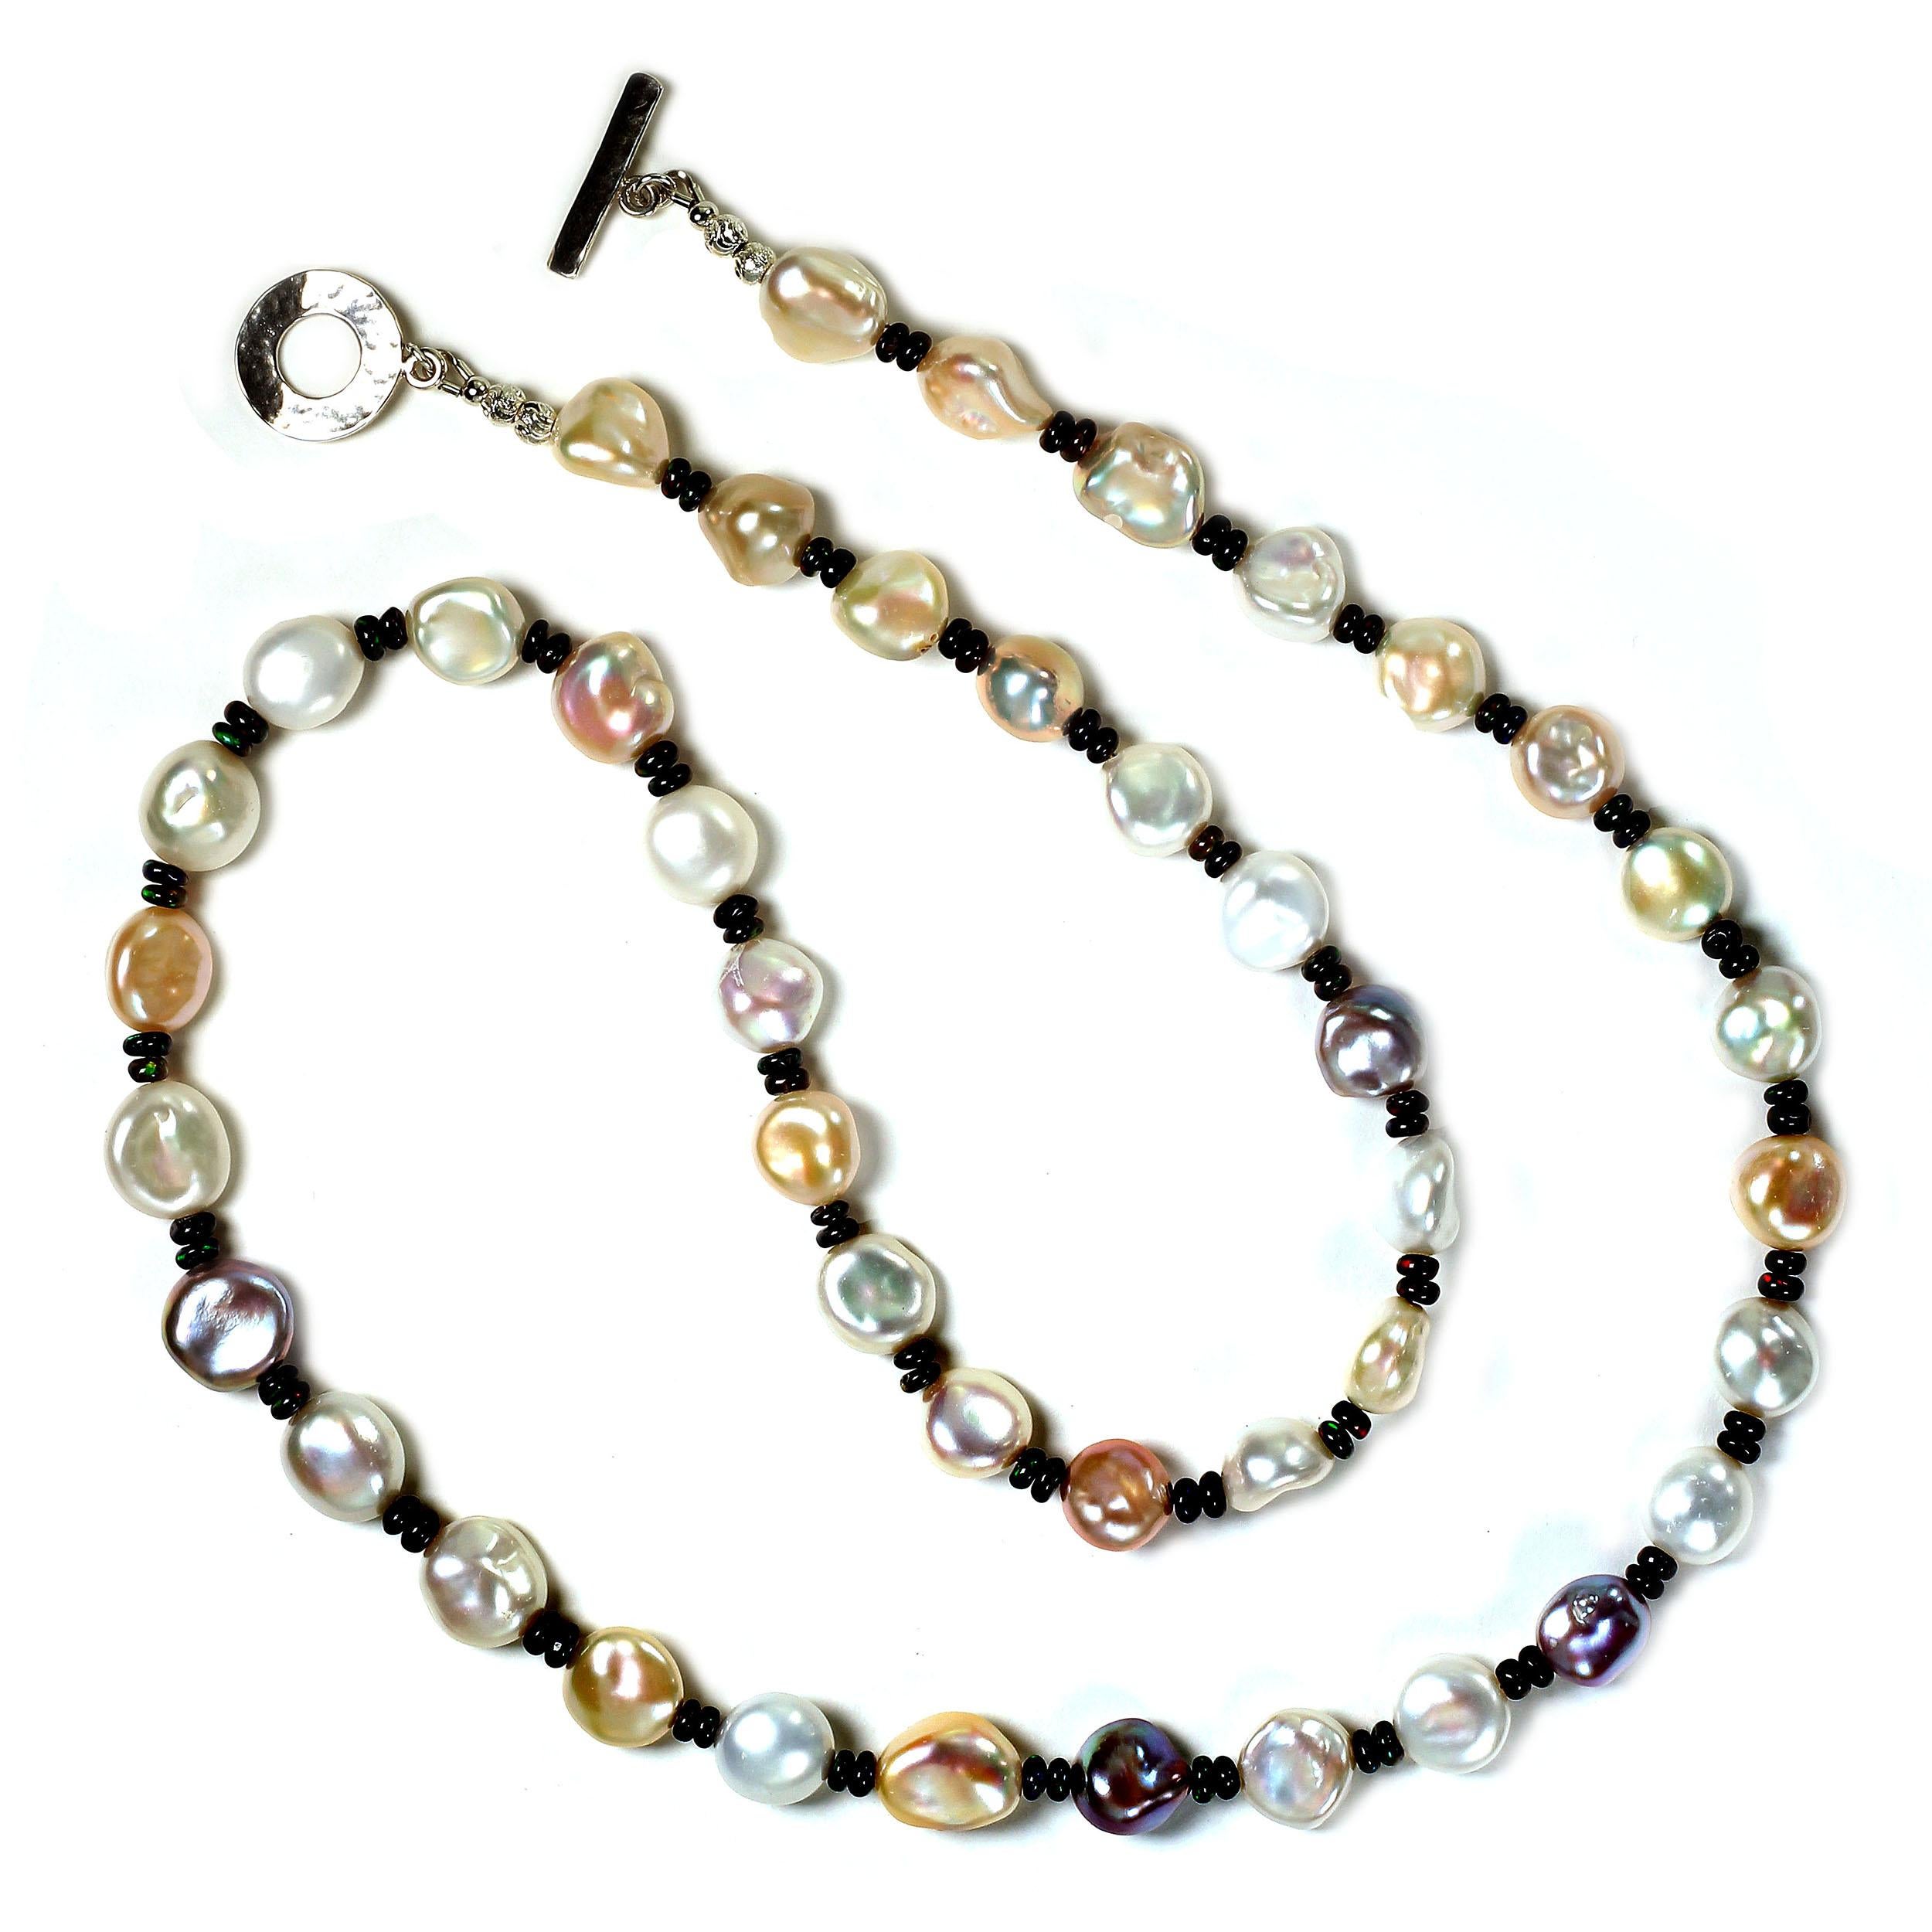 Glowing, Freshwater Pearl Necklace with Black Opal Accents 3